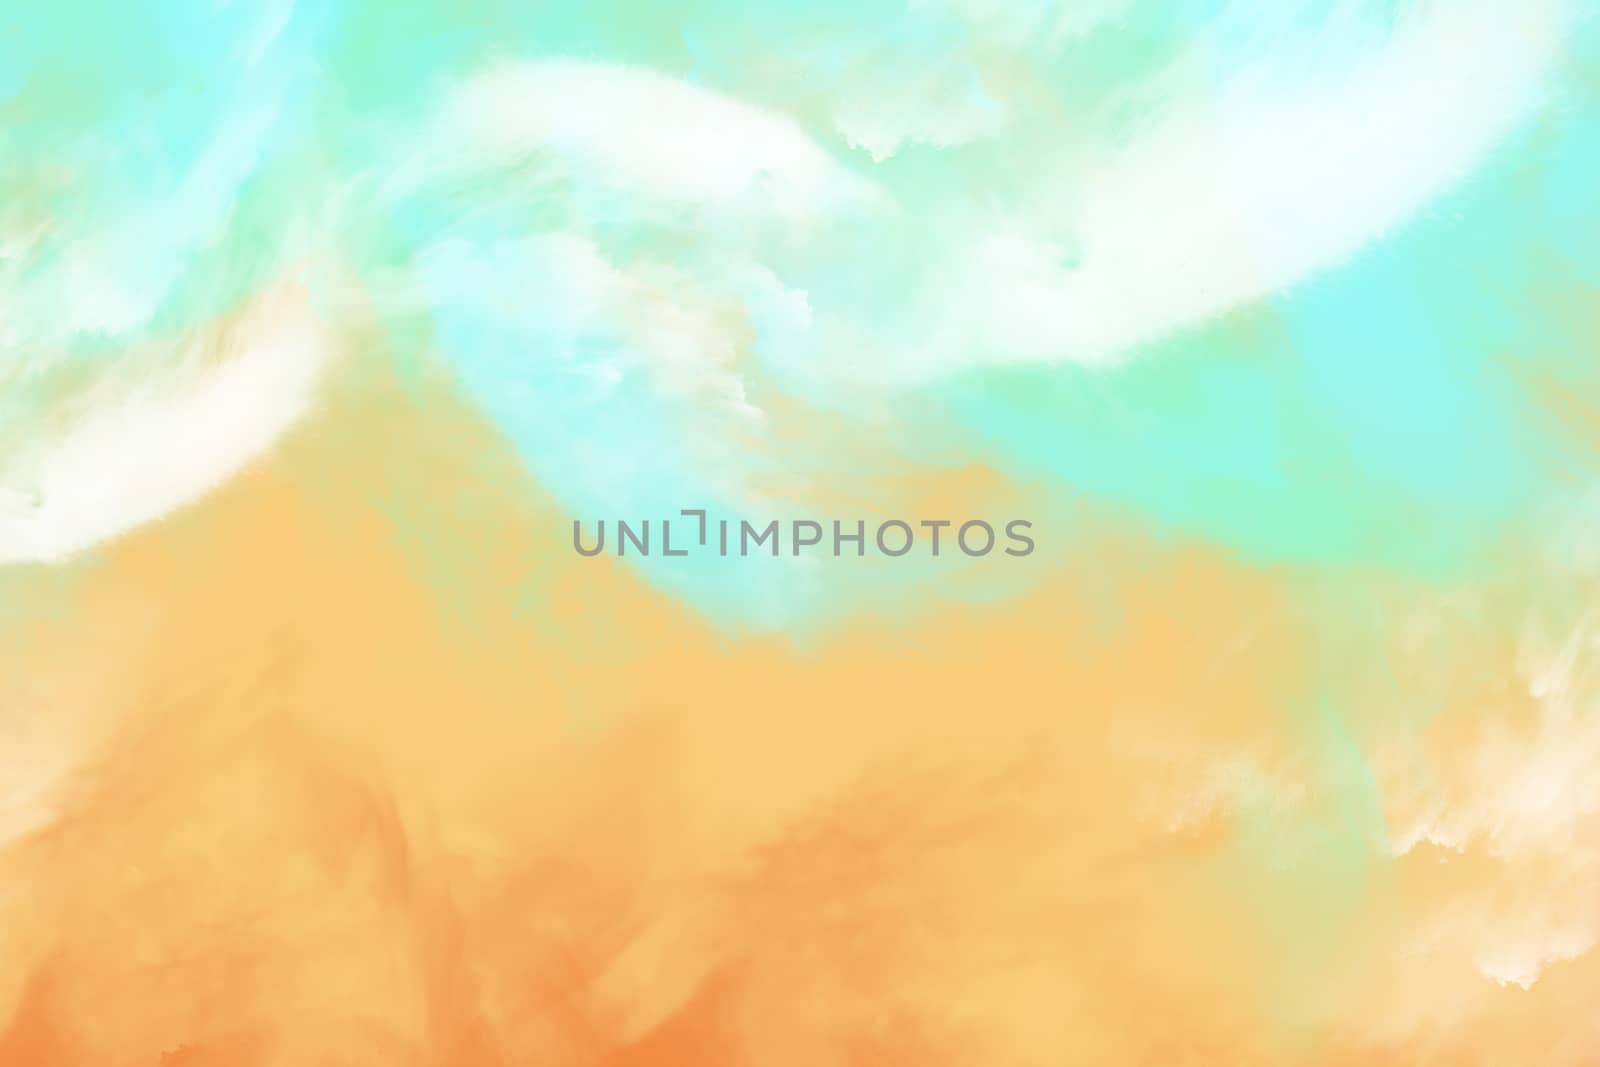 Abstract image of sea and sand beach in aqua menthe color tone for background, digital illustration